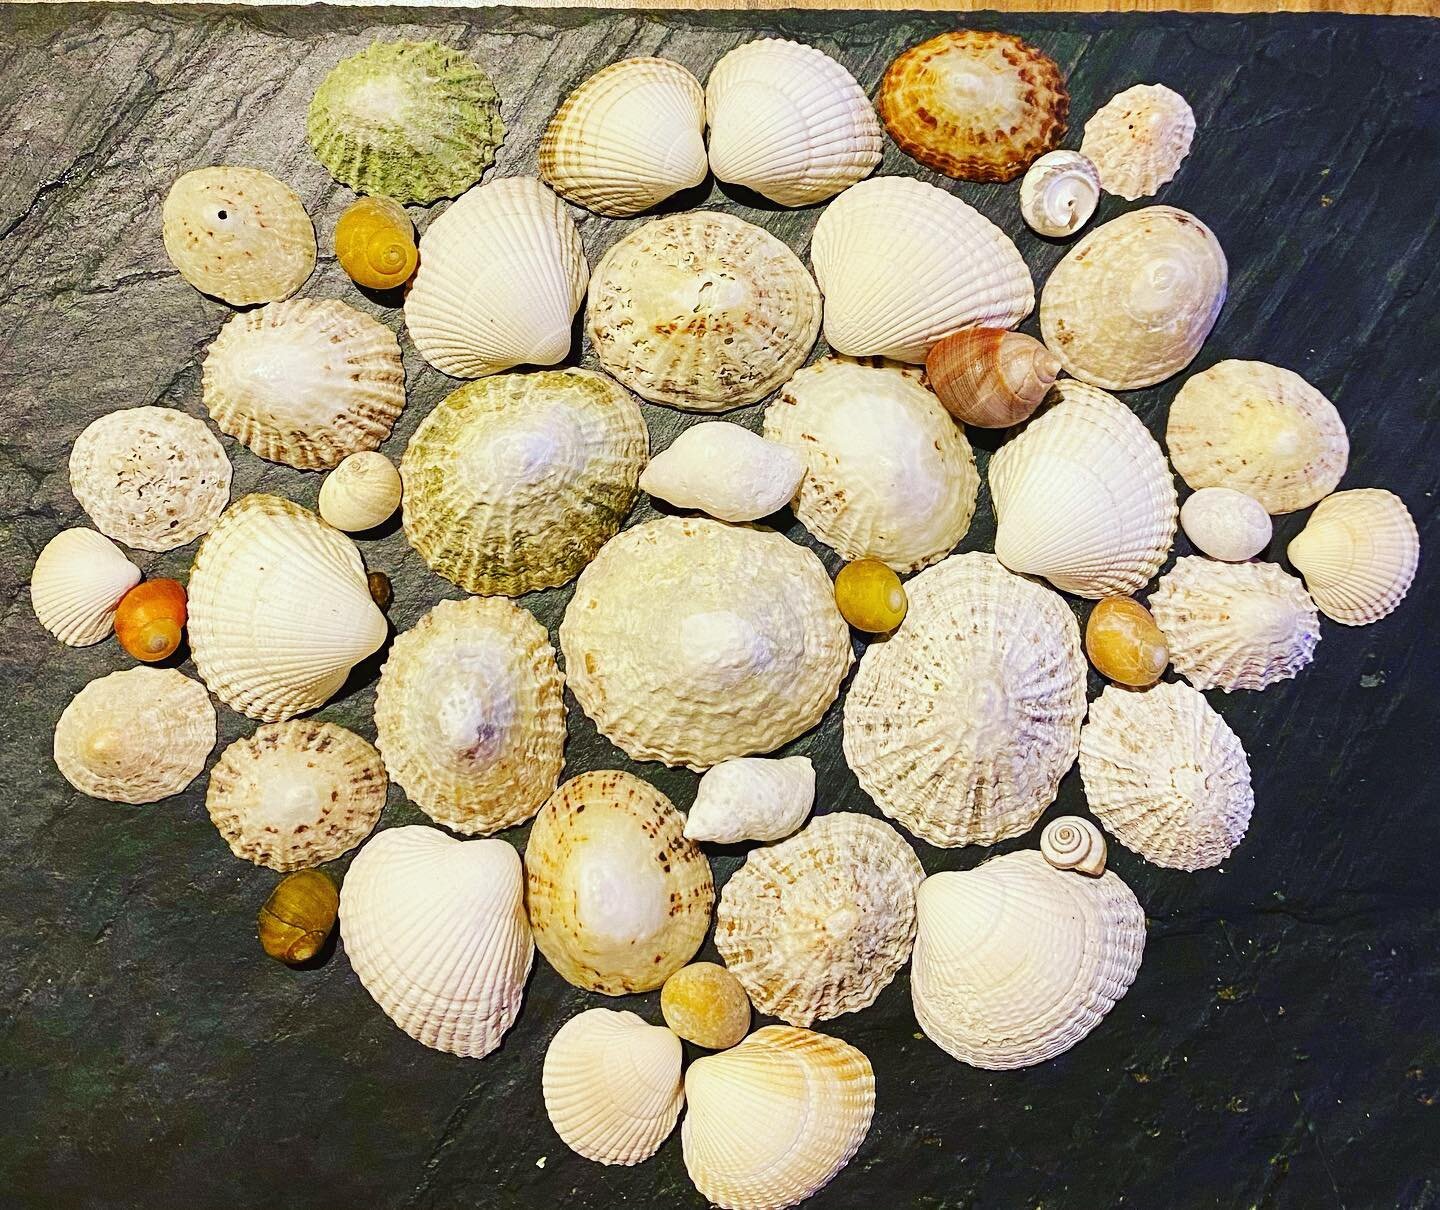 Memories from the beautiful beaches of Clifden Co. Galway&hellip;🦀🦞🦐🦑🐙🌤☀️🌈🦪.
.
.
.
.
#glenabbeycastle #clifden #clifdenireland #galwaybeaches #shells #art #beachesofireland #holidays #familyholidays #shellart #treasures #memories